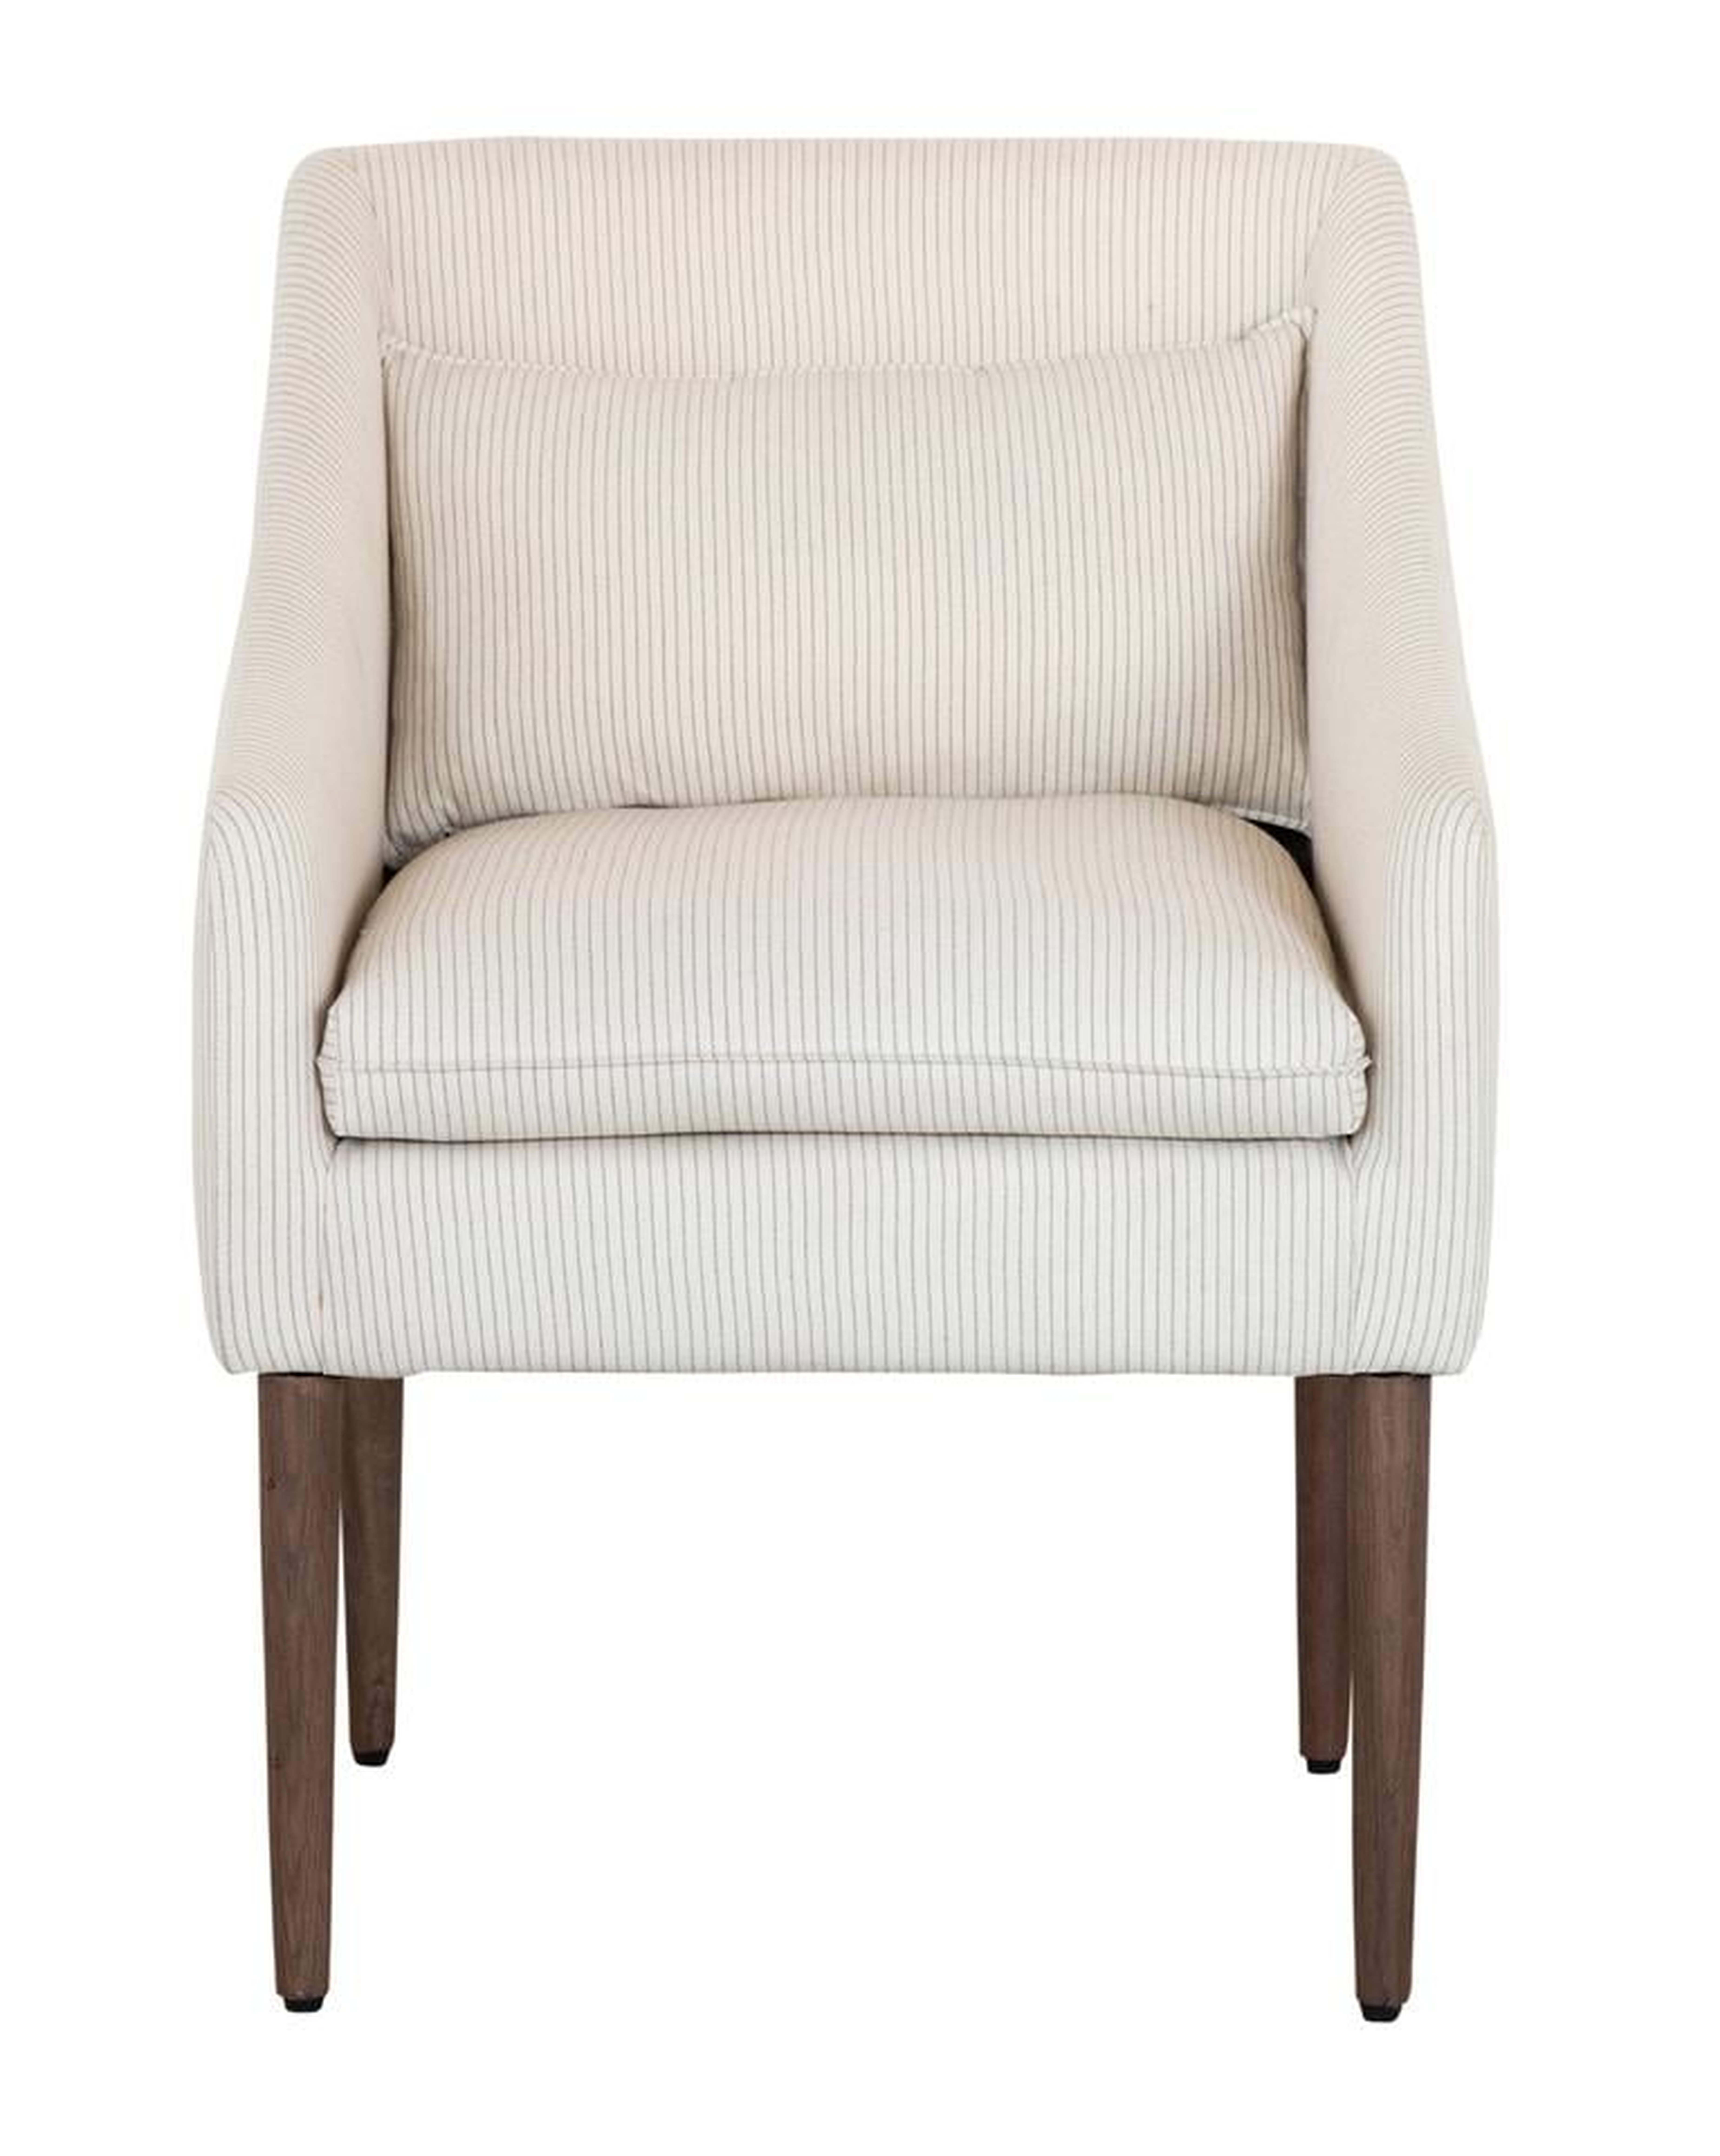 Laurie Chair, Ivory - McGee & Co.